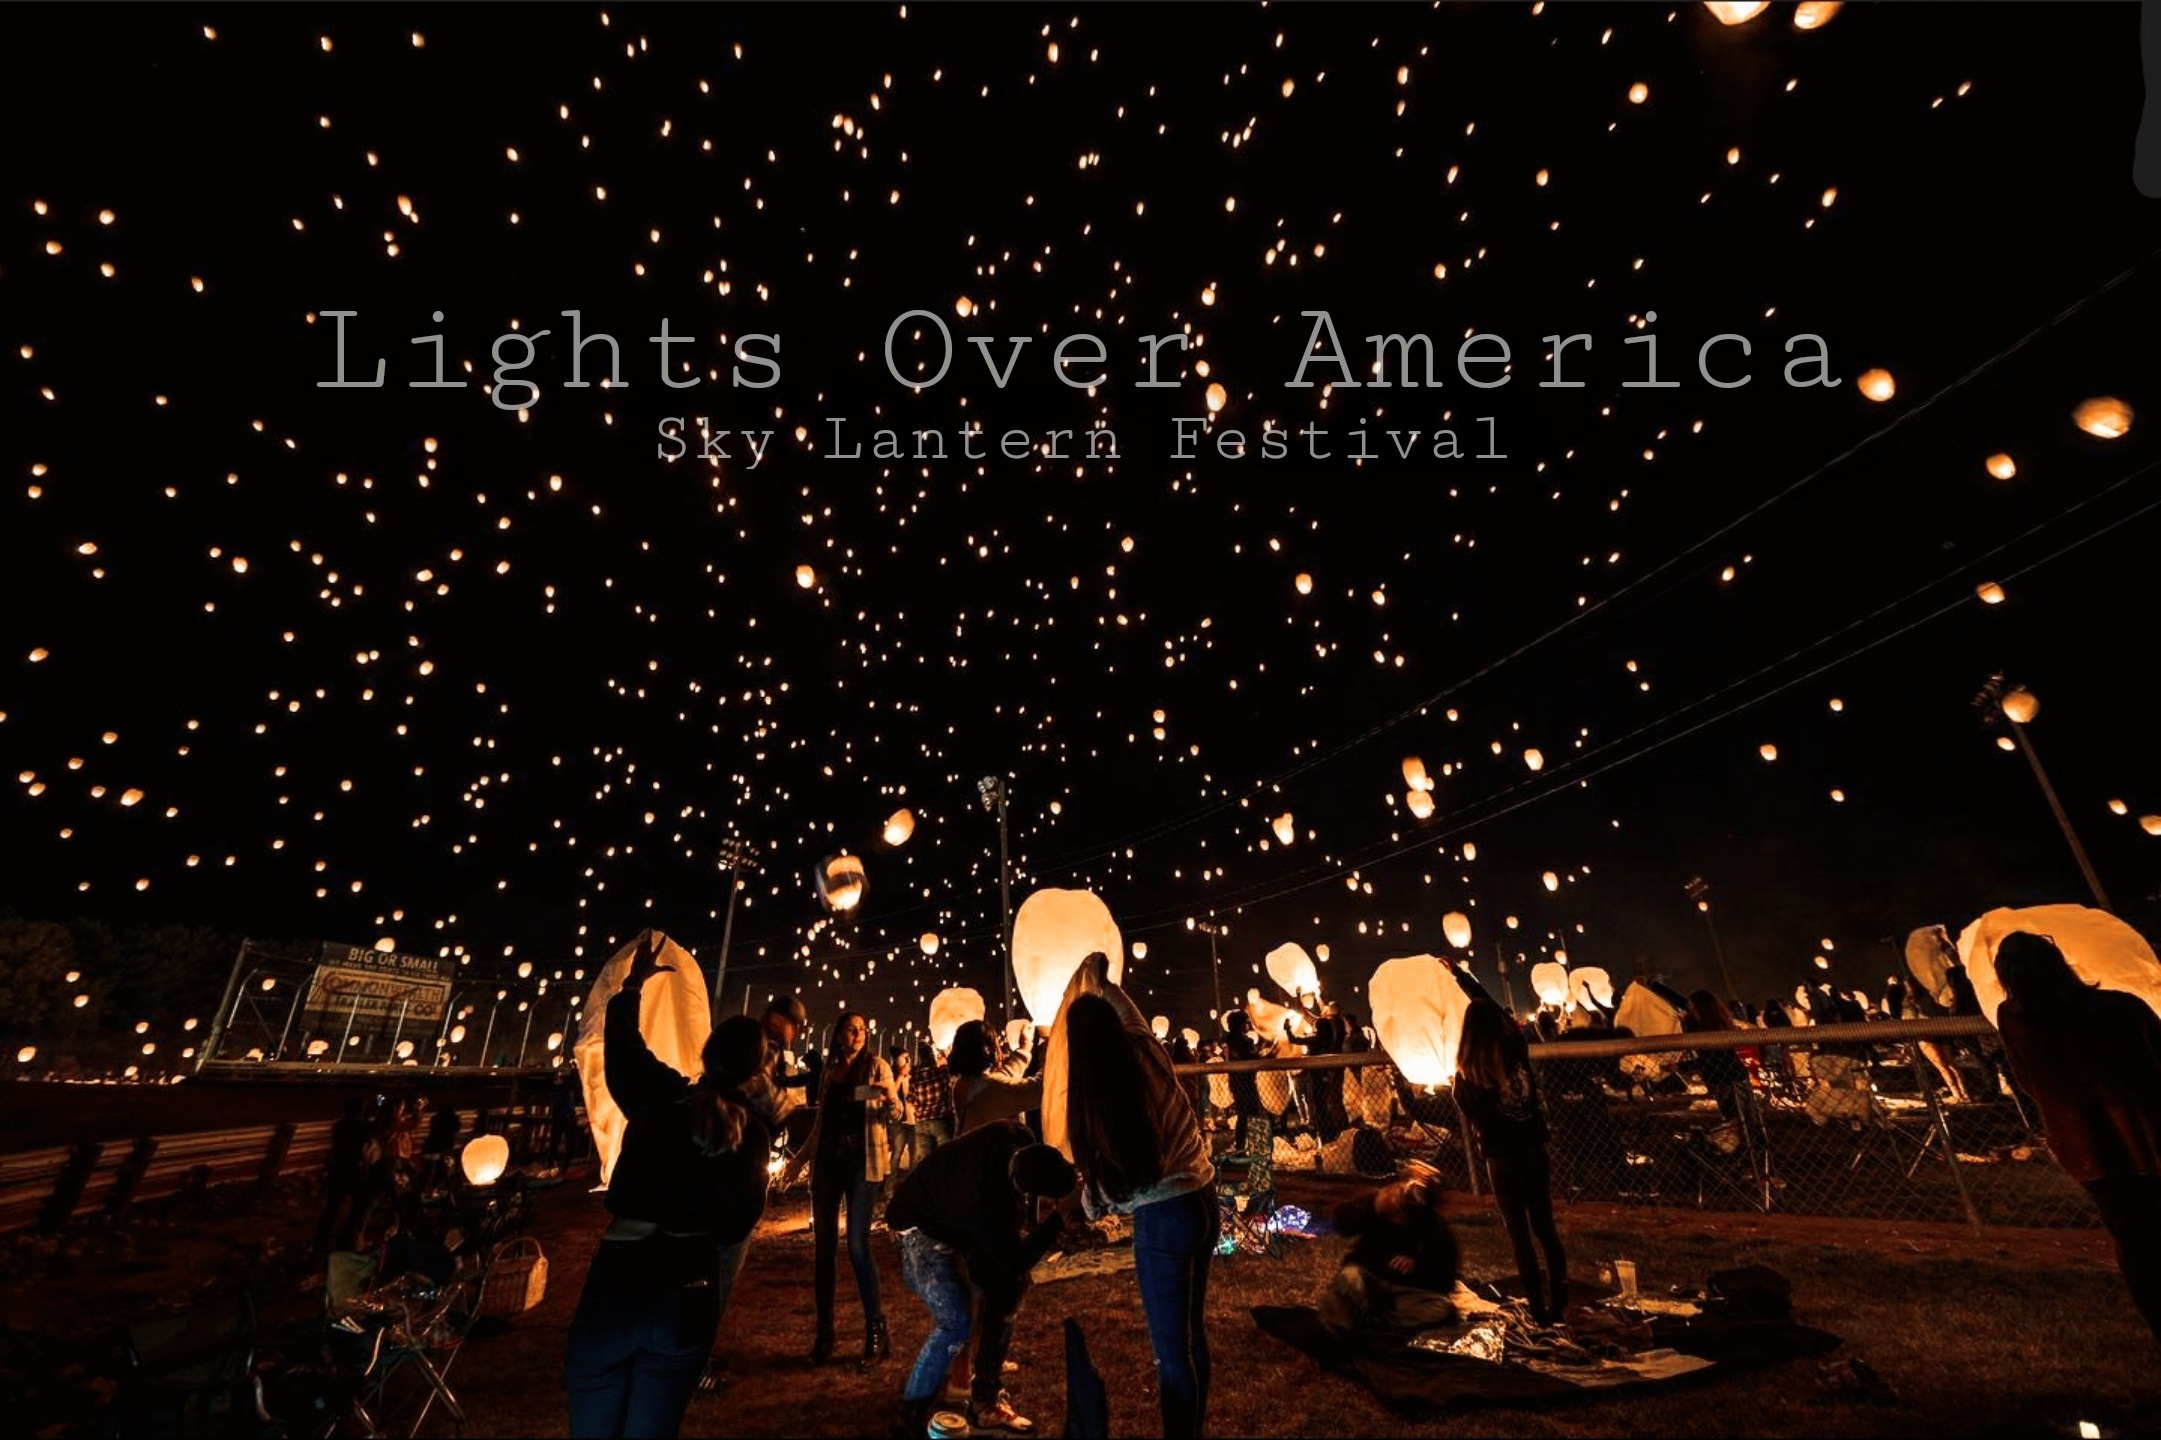 Lights Over – The #1 Lantern in America